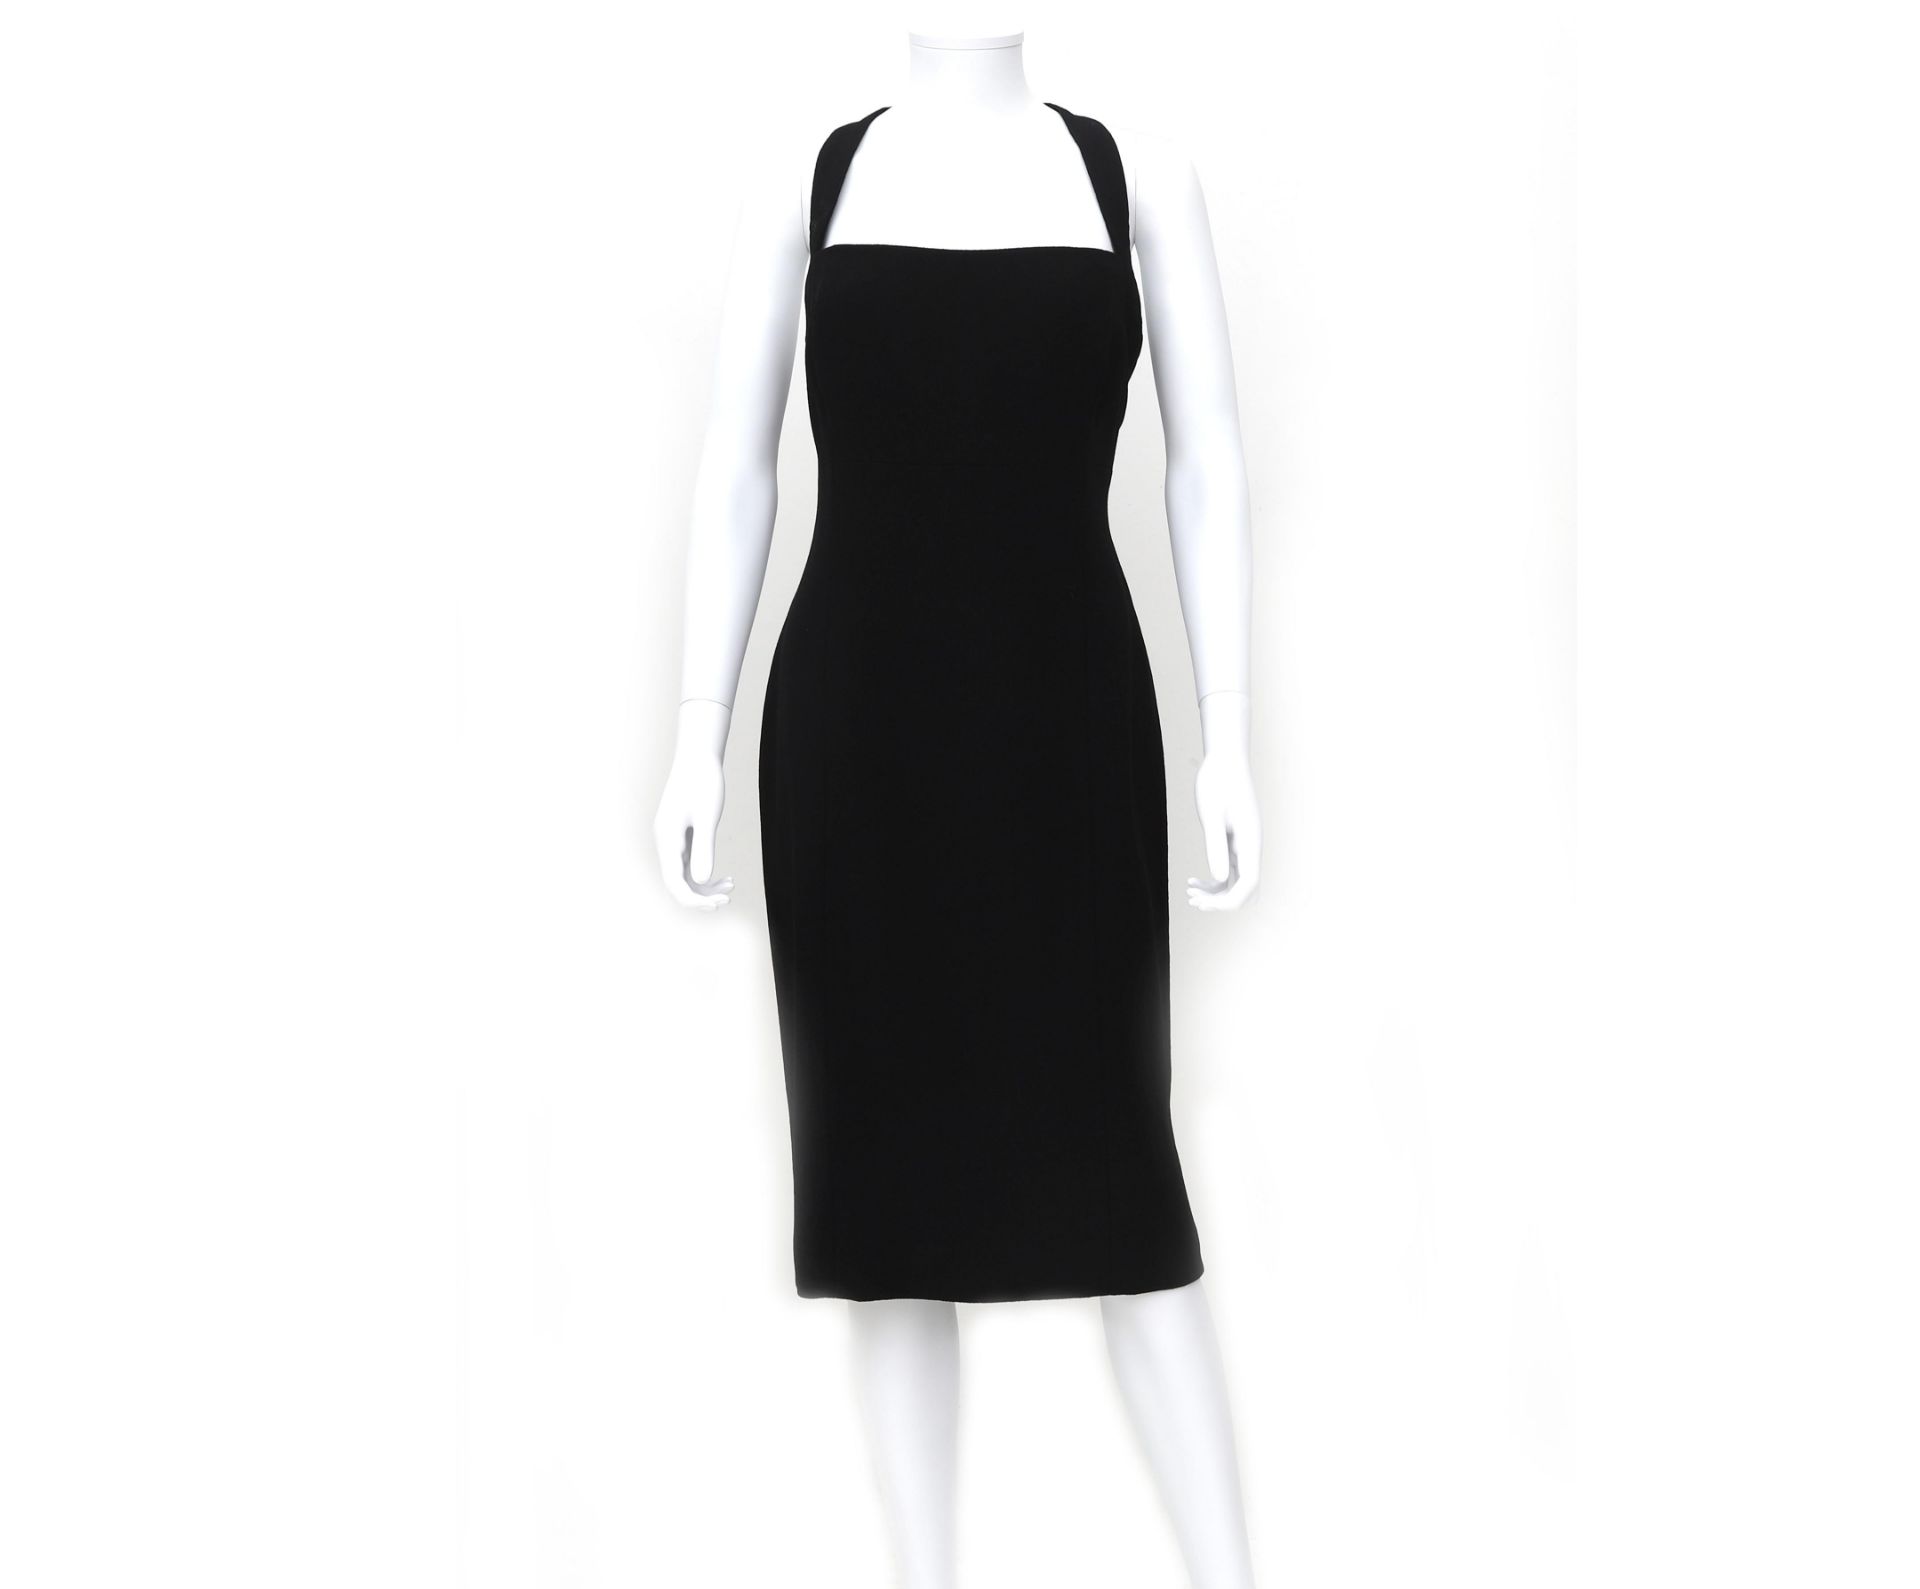 A Chanel Boutique, black bodycon dress with wide shoulder straps. Fabric: 95% silk, 5% lycra Size: